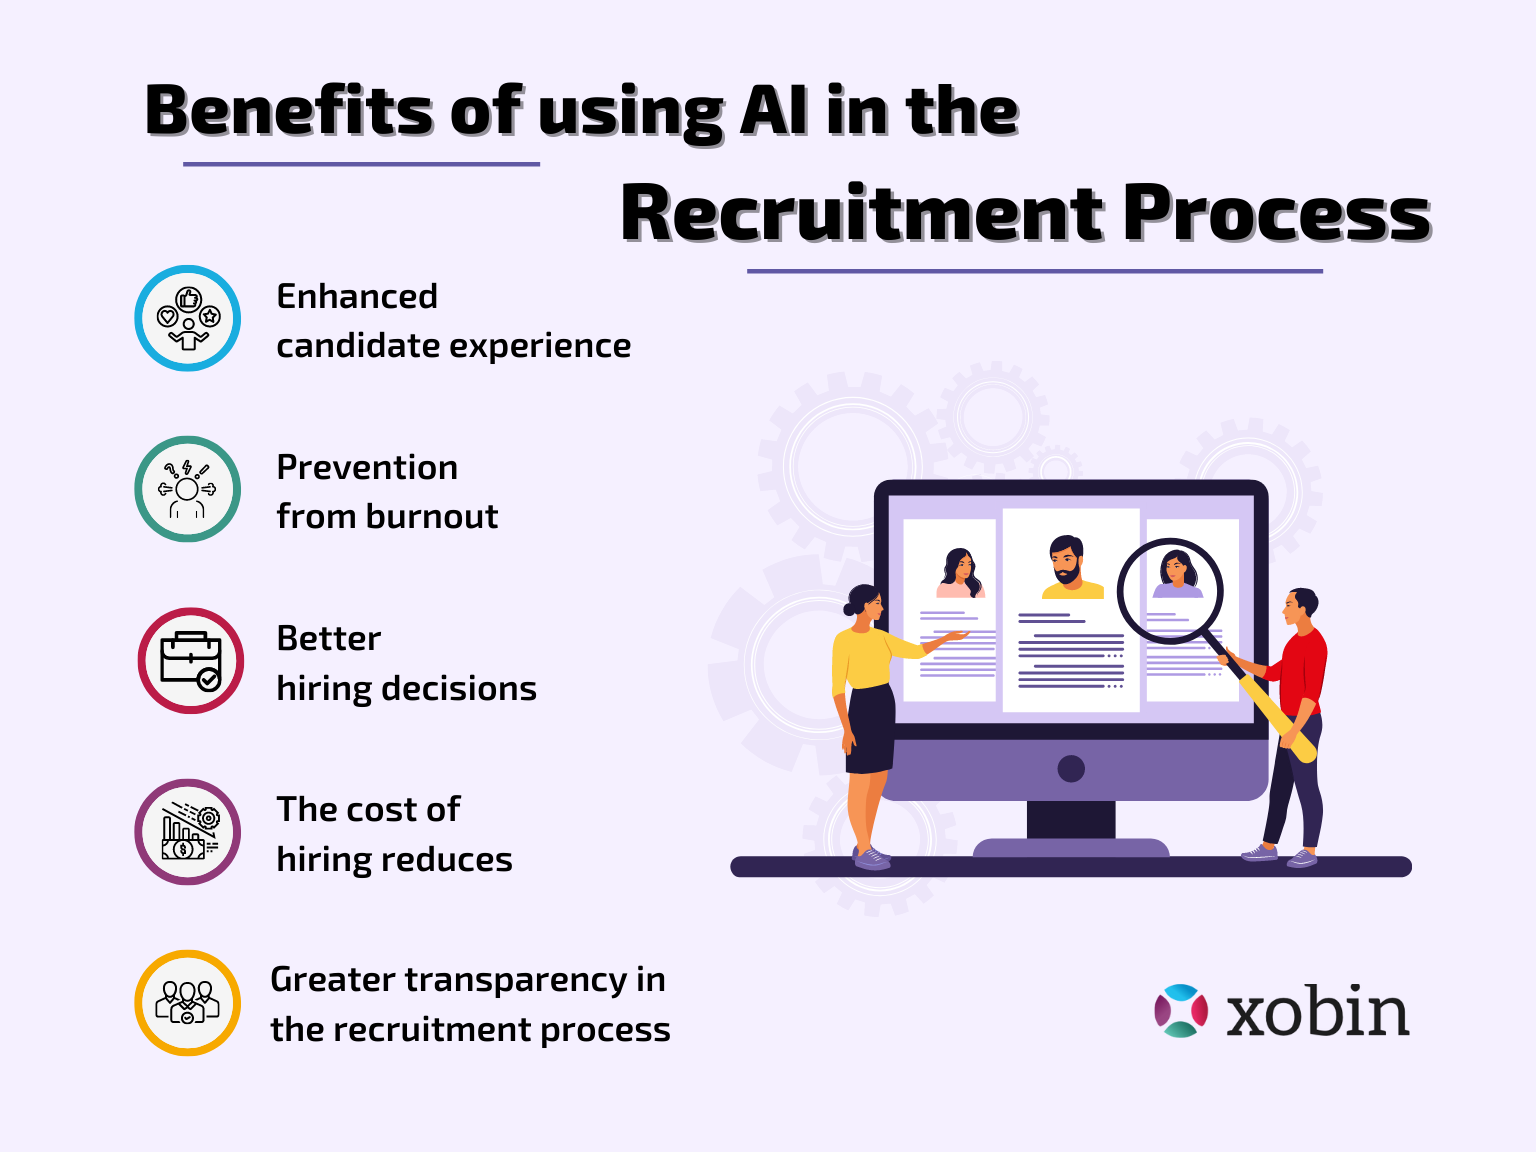 Benefits of using AI in hiring